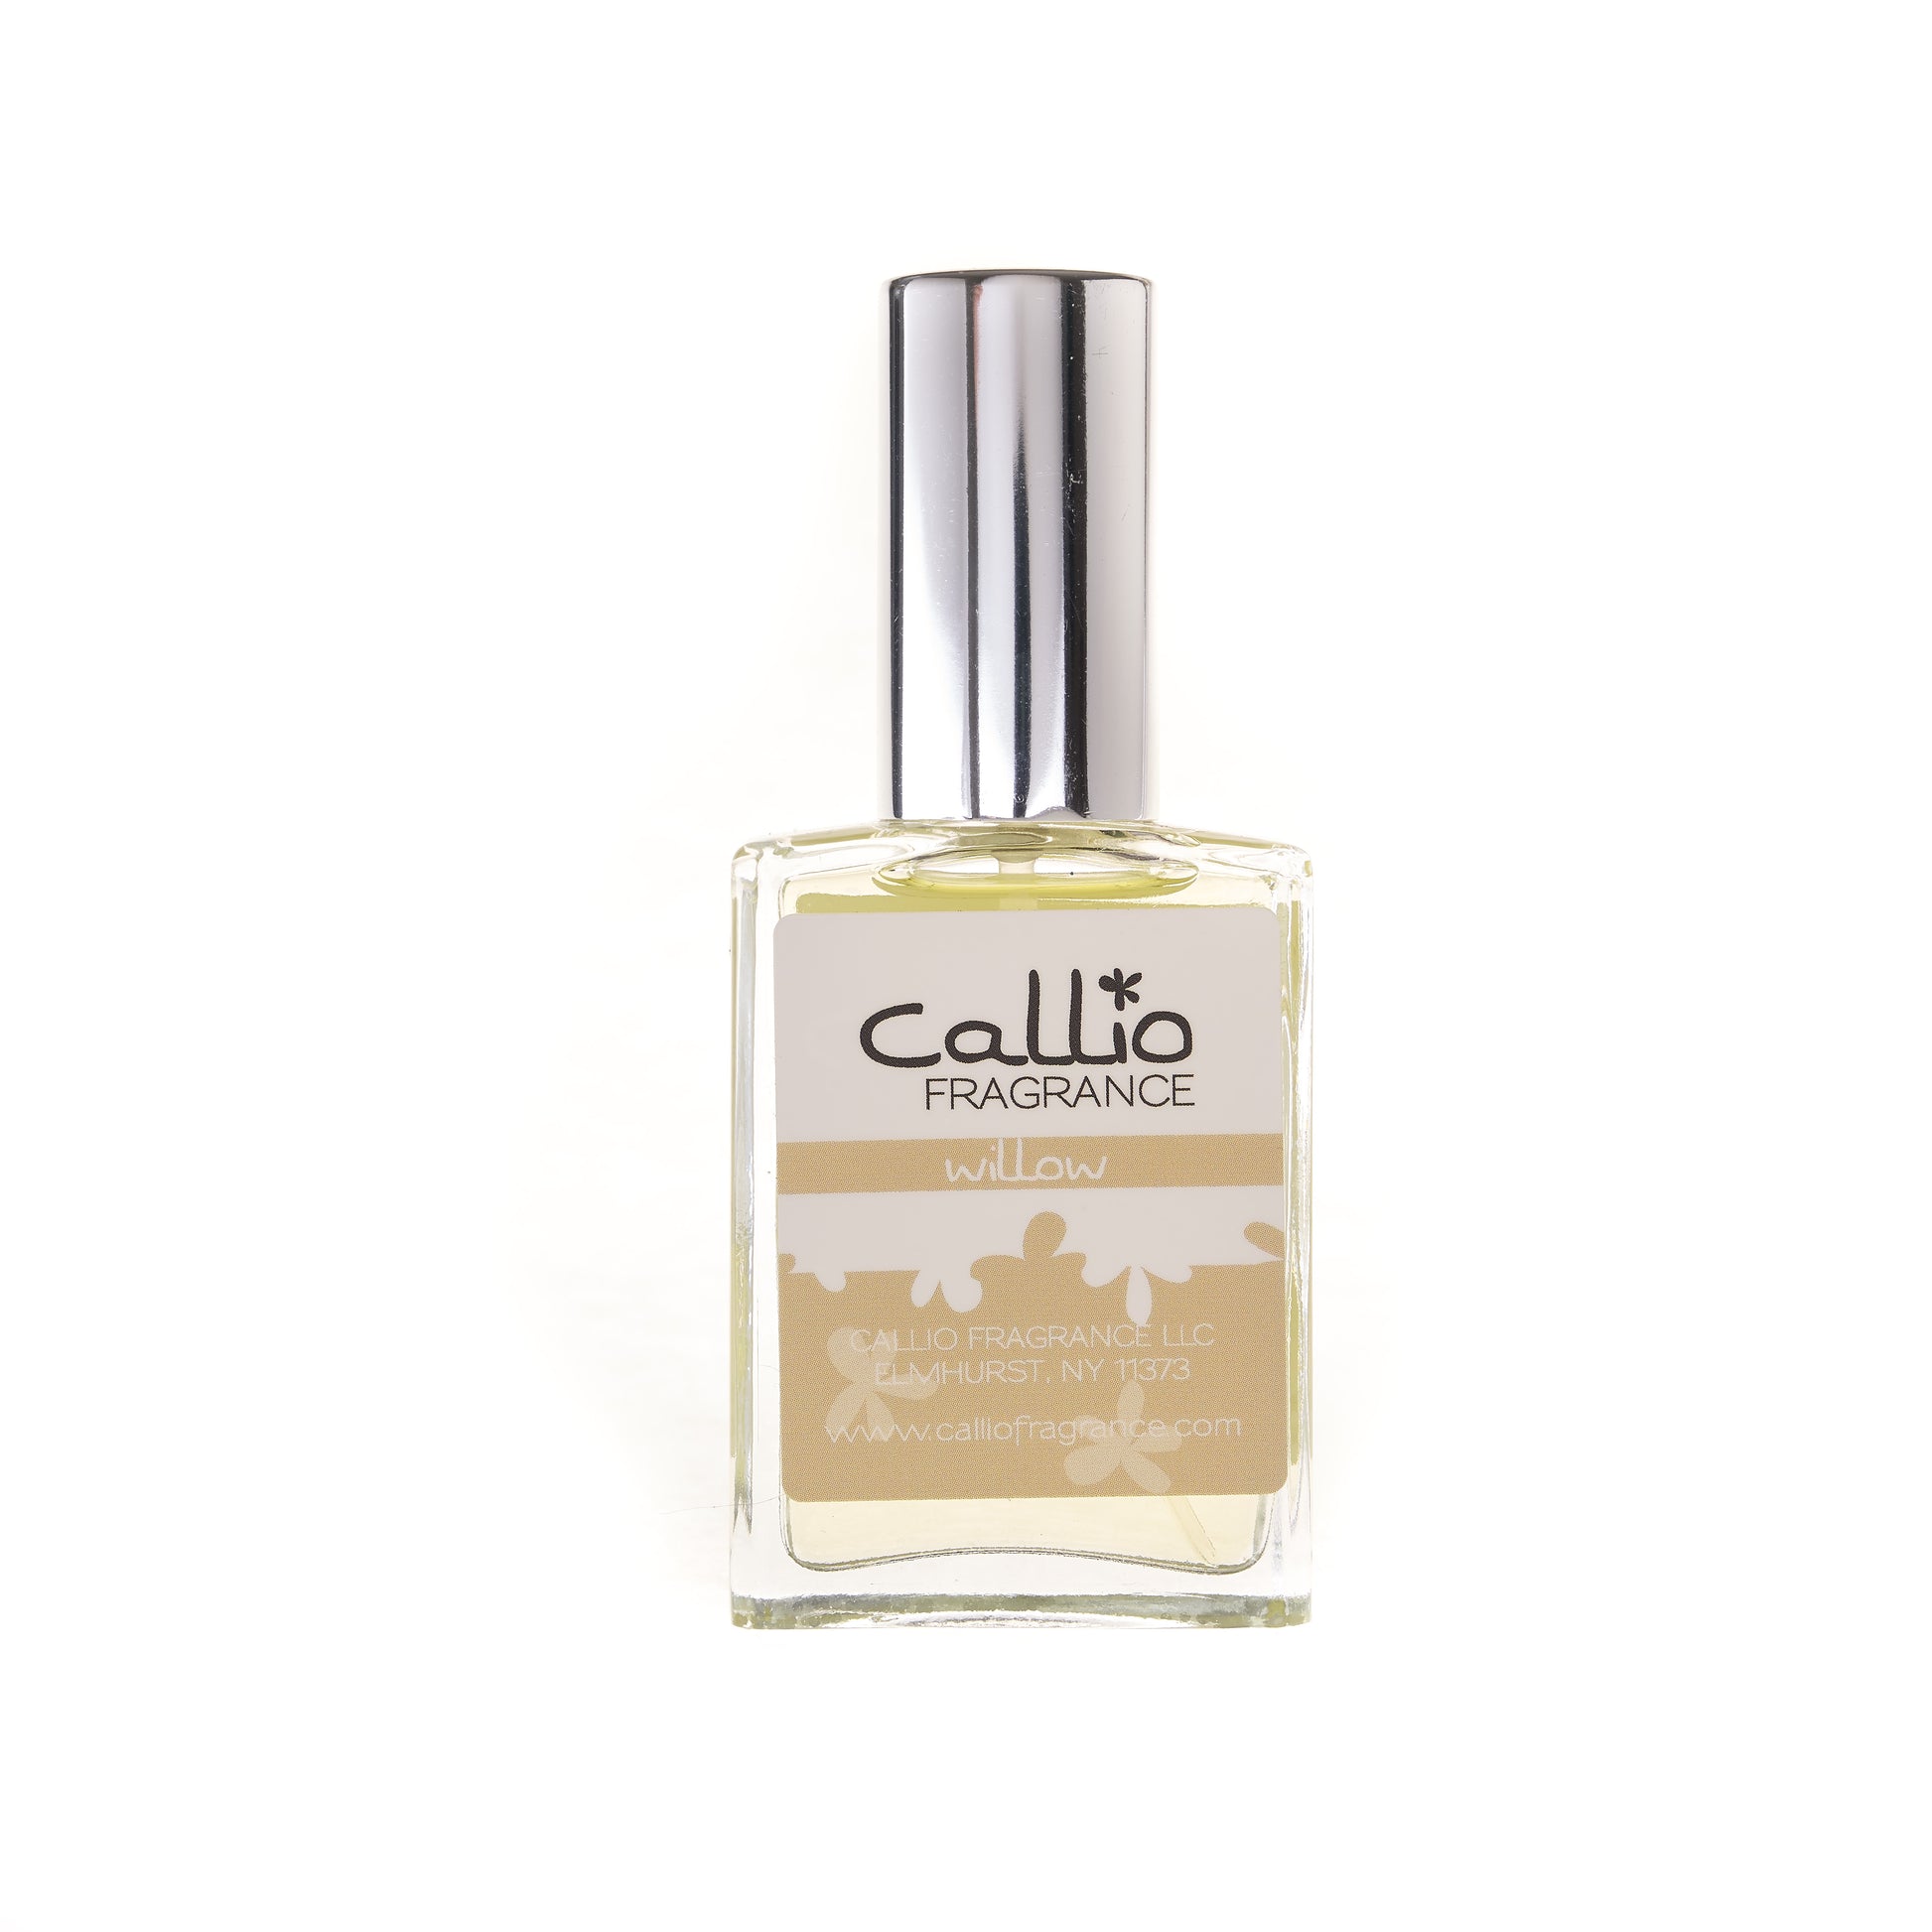 Willow Perfume -one ounce bottle on a white background.